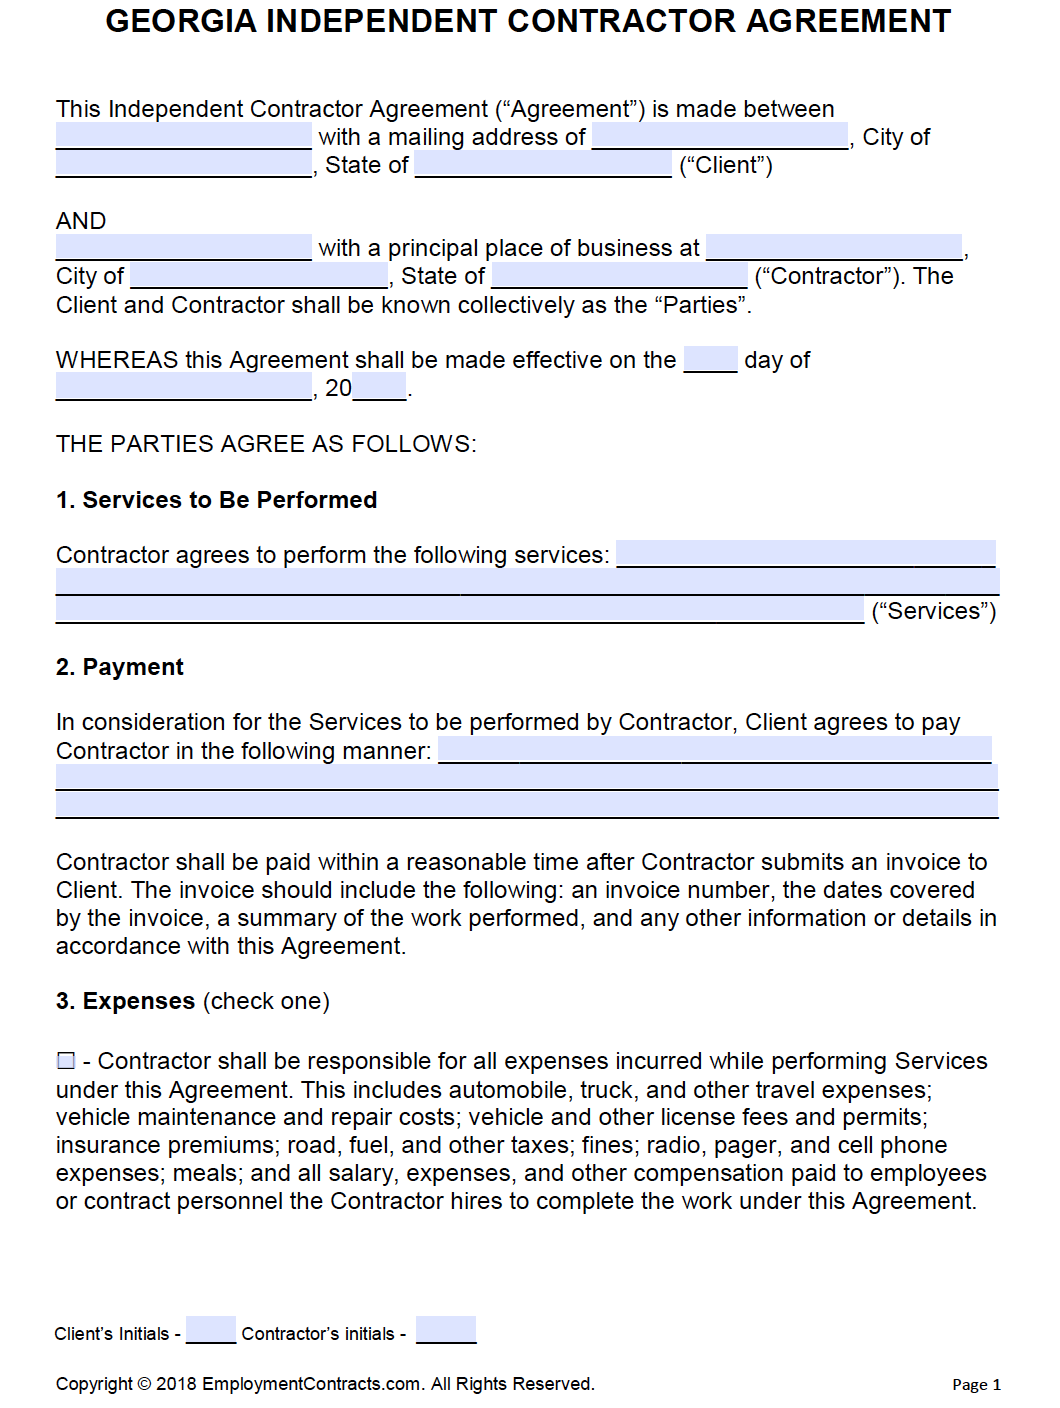 Georgia Independent Contractor Agreement PDF Word